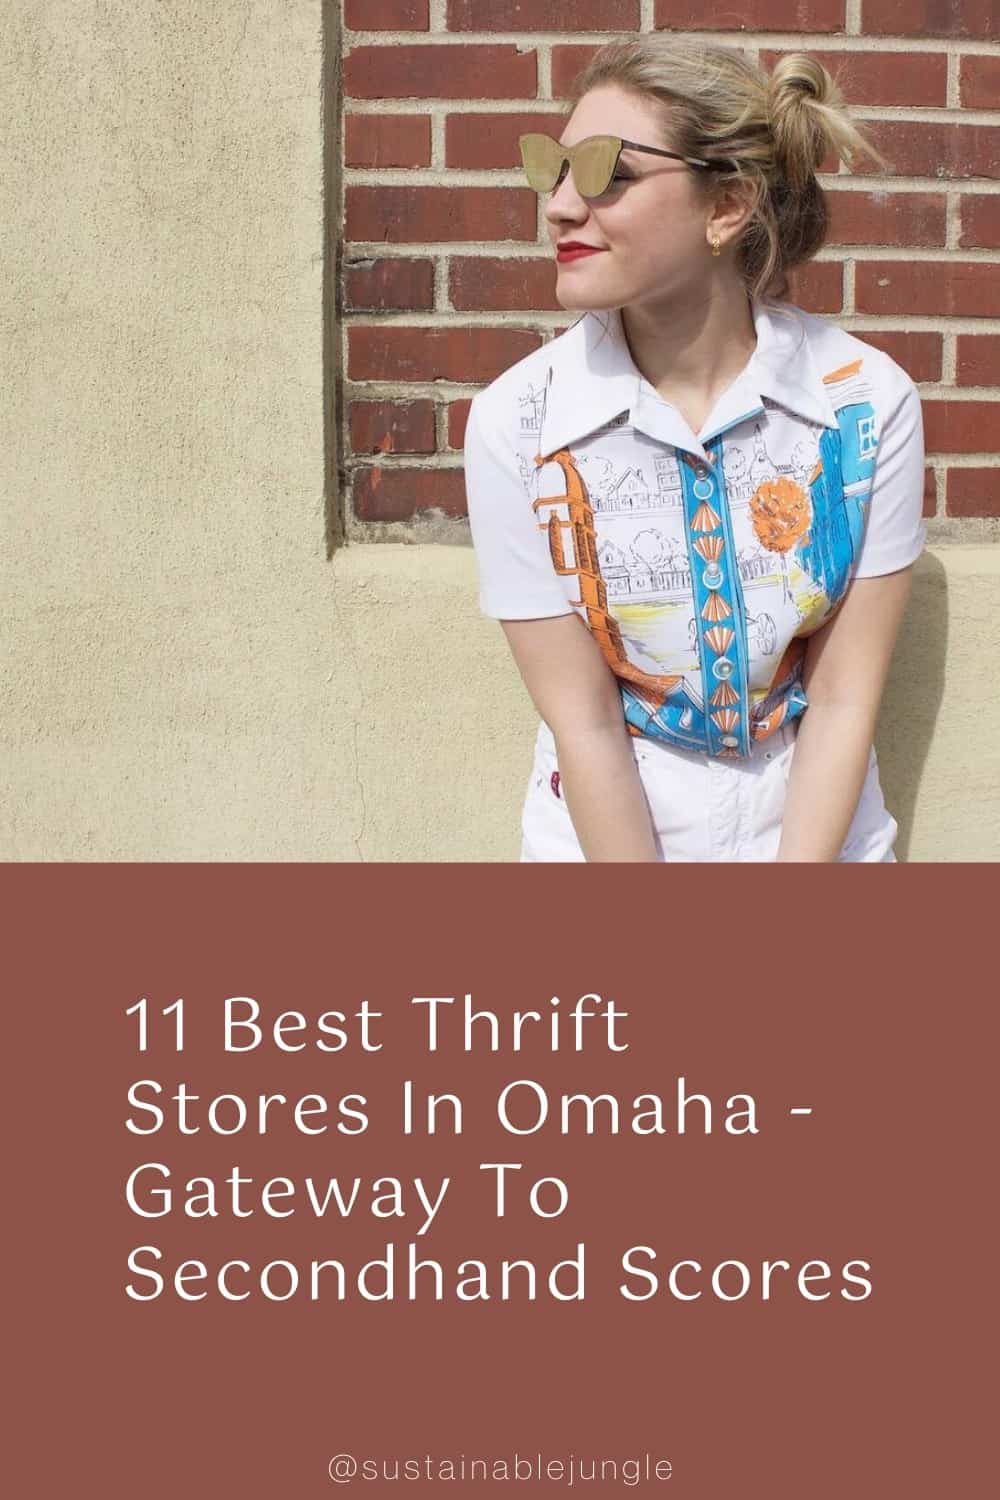 11 Best Thrift Stores In Omaha - Gateway To Secondhand Scores #thriftstoresomaha #bestthriftstoresomaha #clothingthriftstoresomaha #thriftstoresinomaha #bestthriftstoresinomaha #omahathriftstores #furniturethriftstoresomaha #sustainablejungle Image by Flying Worm Vintage